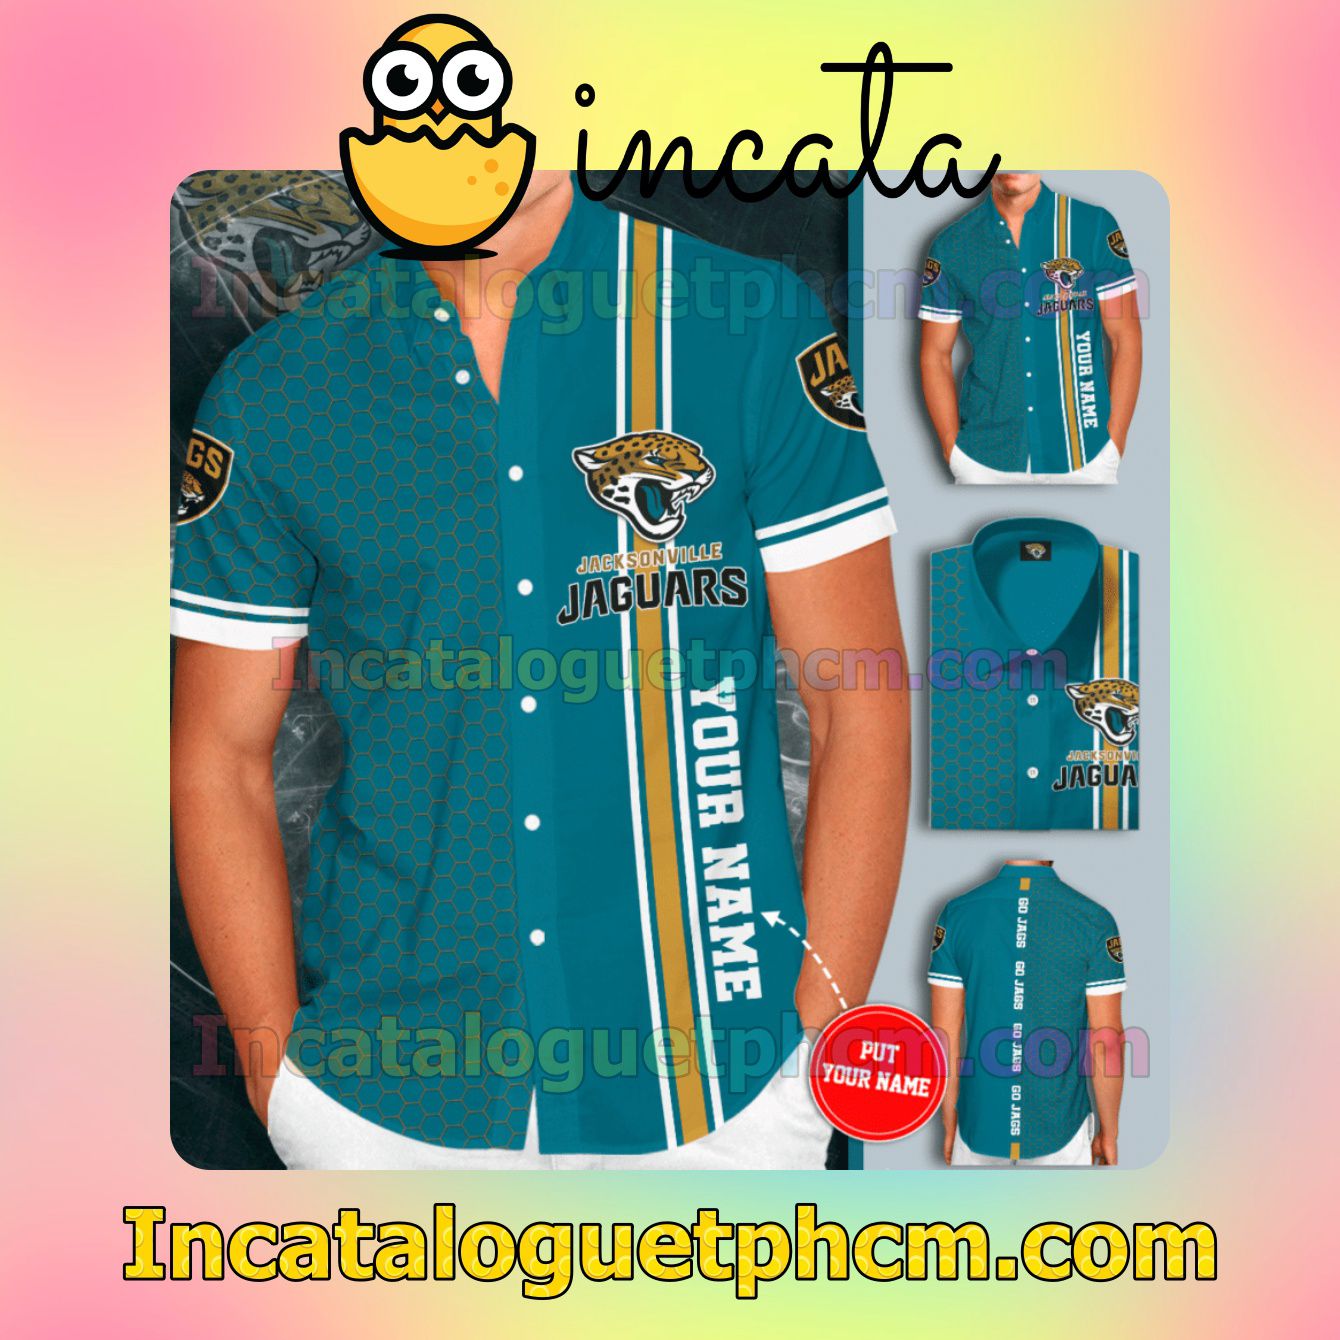 Personalized Jacksonville Jaguars Go Jags Tiling Teal Button Shirt And Swim Trunk